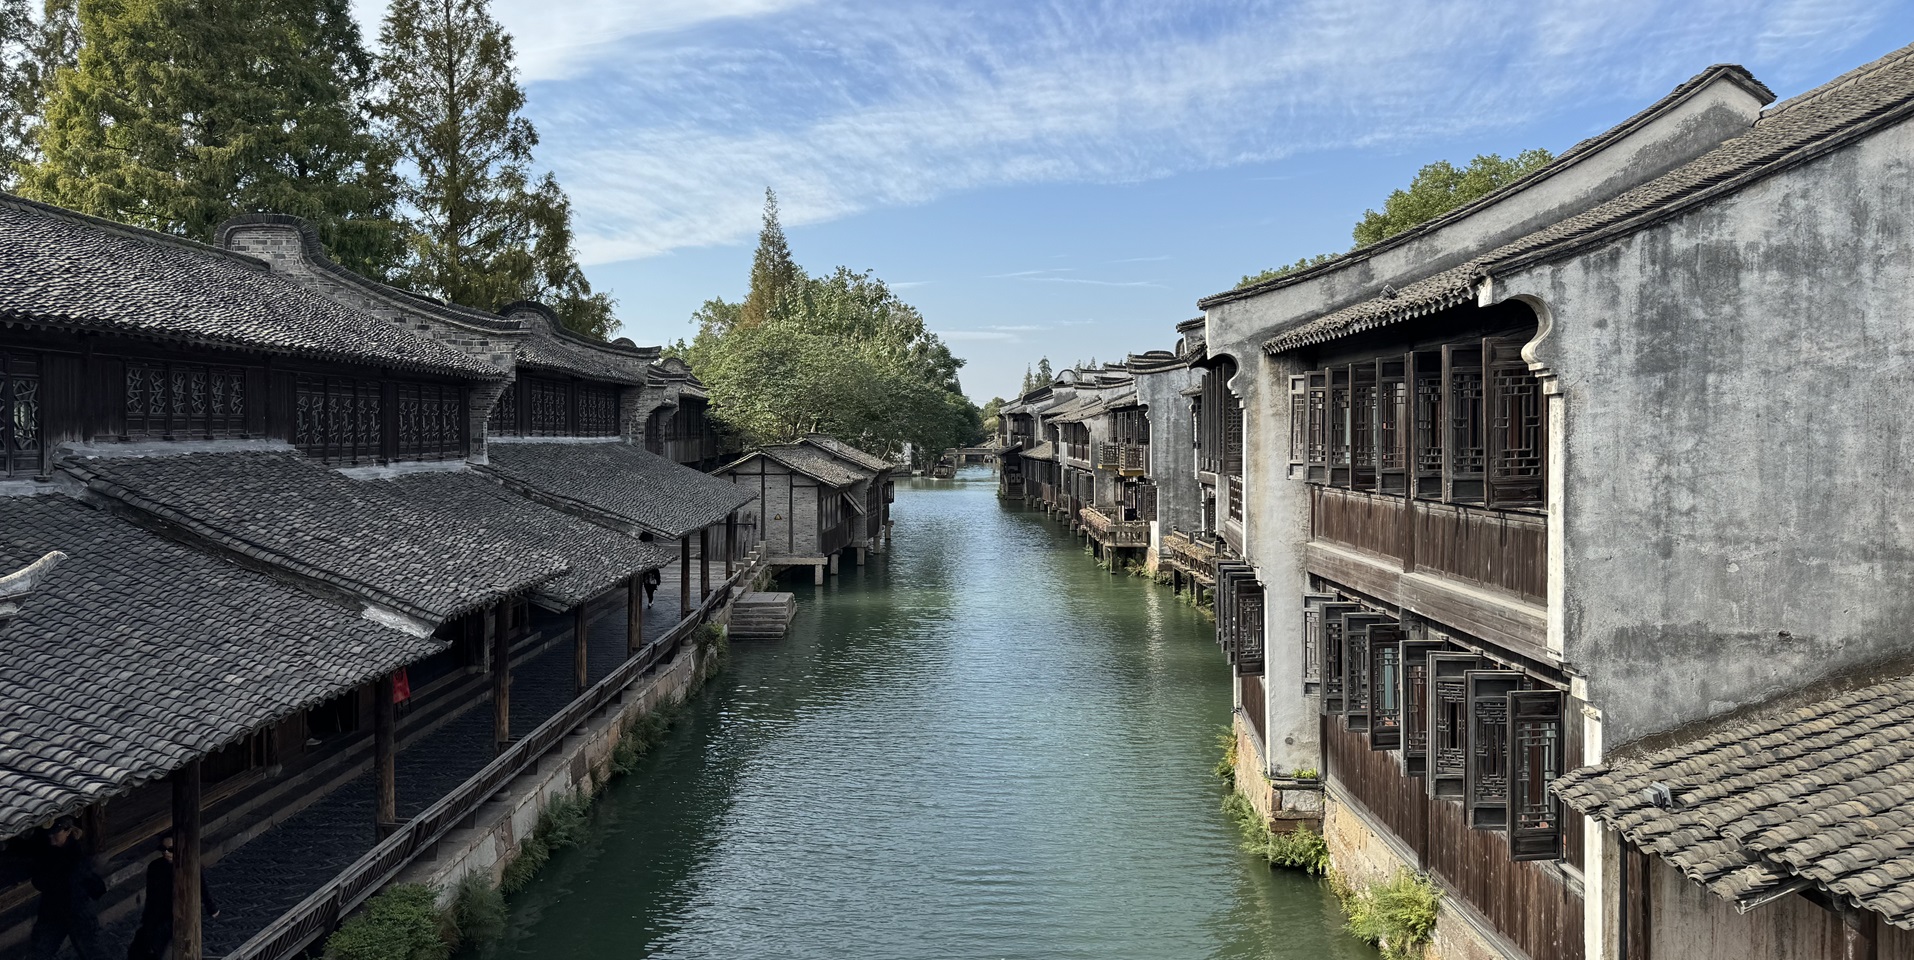 A view of the ancient river town Wuzhen in east China's Zhejiang Province. /WIC